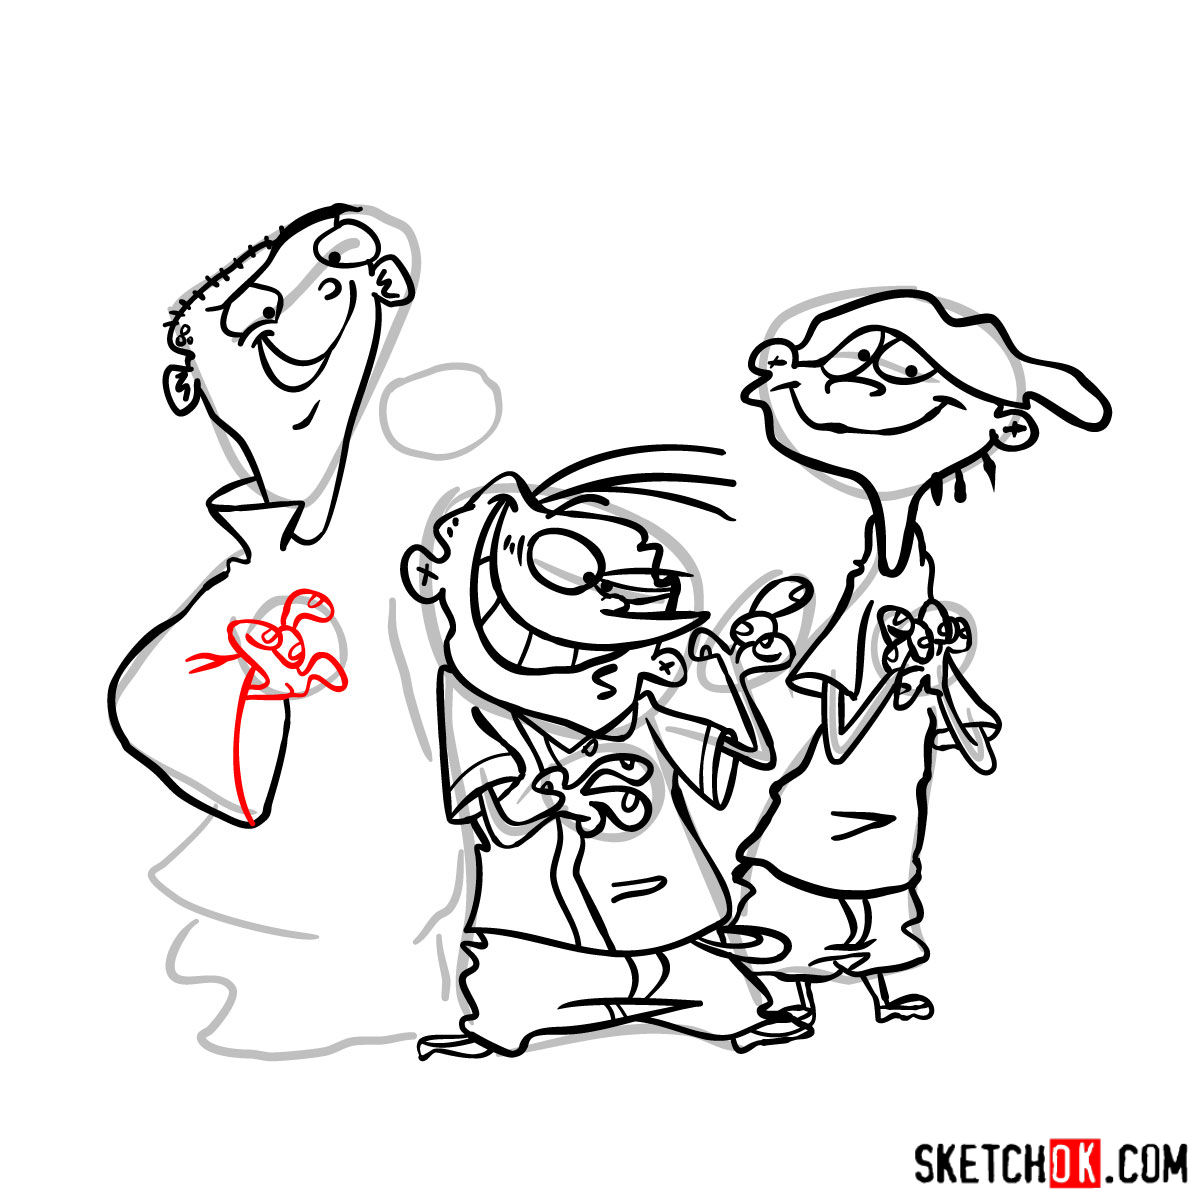 How to draw Ed, Edd and Eddy together - step 24